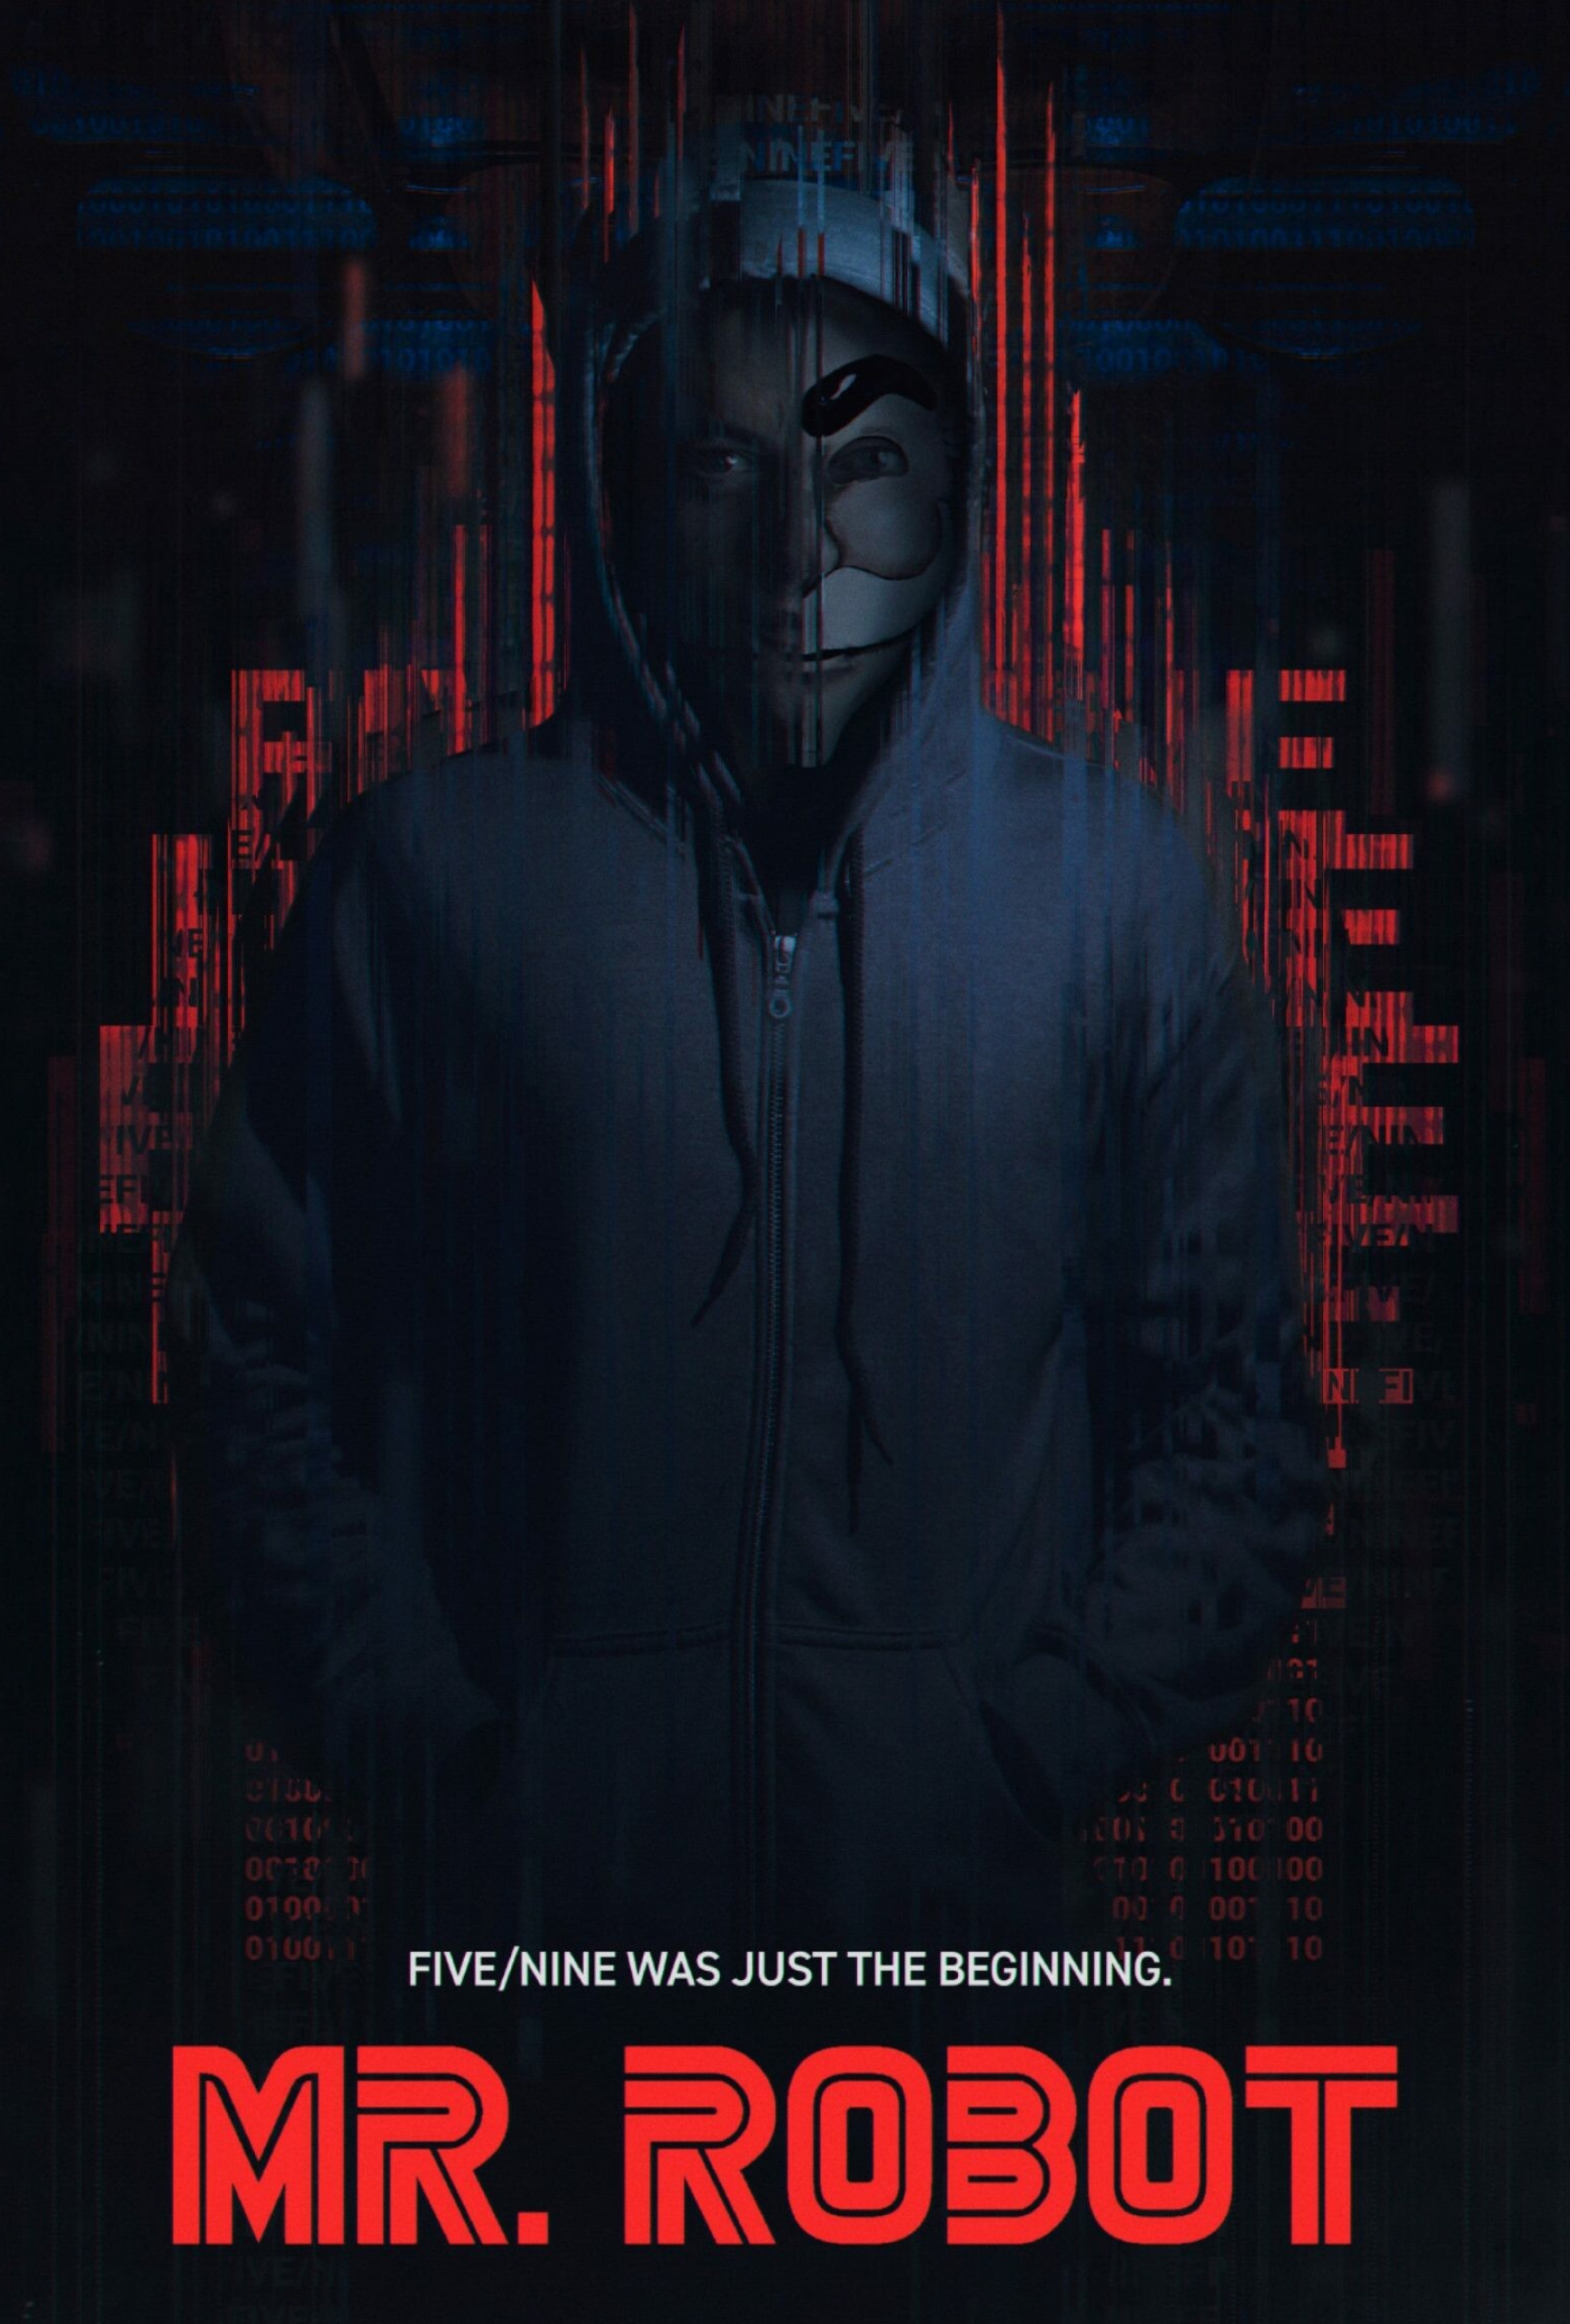 Mr. Robot: The show received two Golden Globe Awards, three Primetime Emmy Awards, and a Peabody Award. 1730x2560 HD Background.